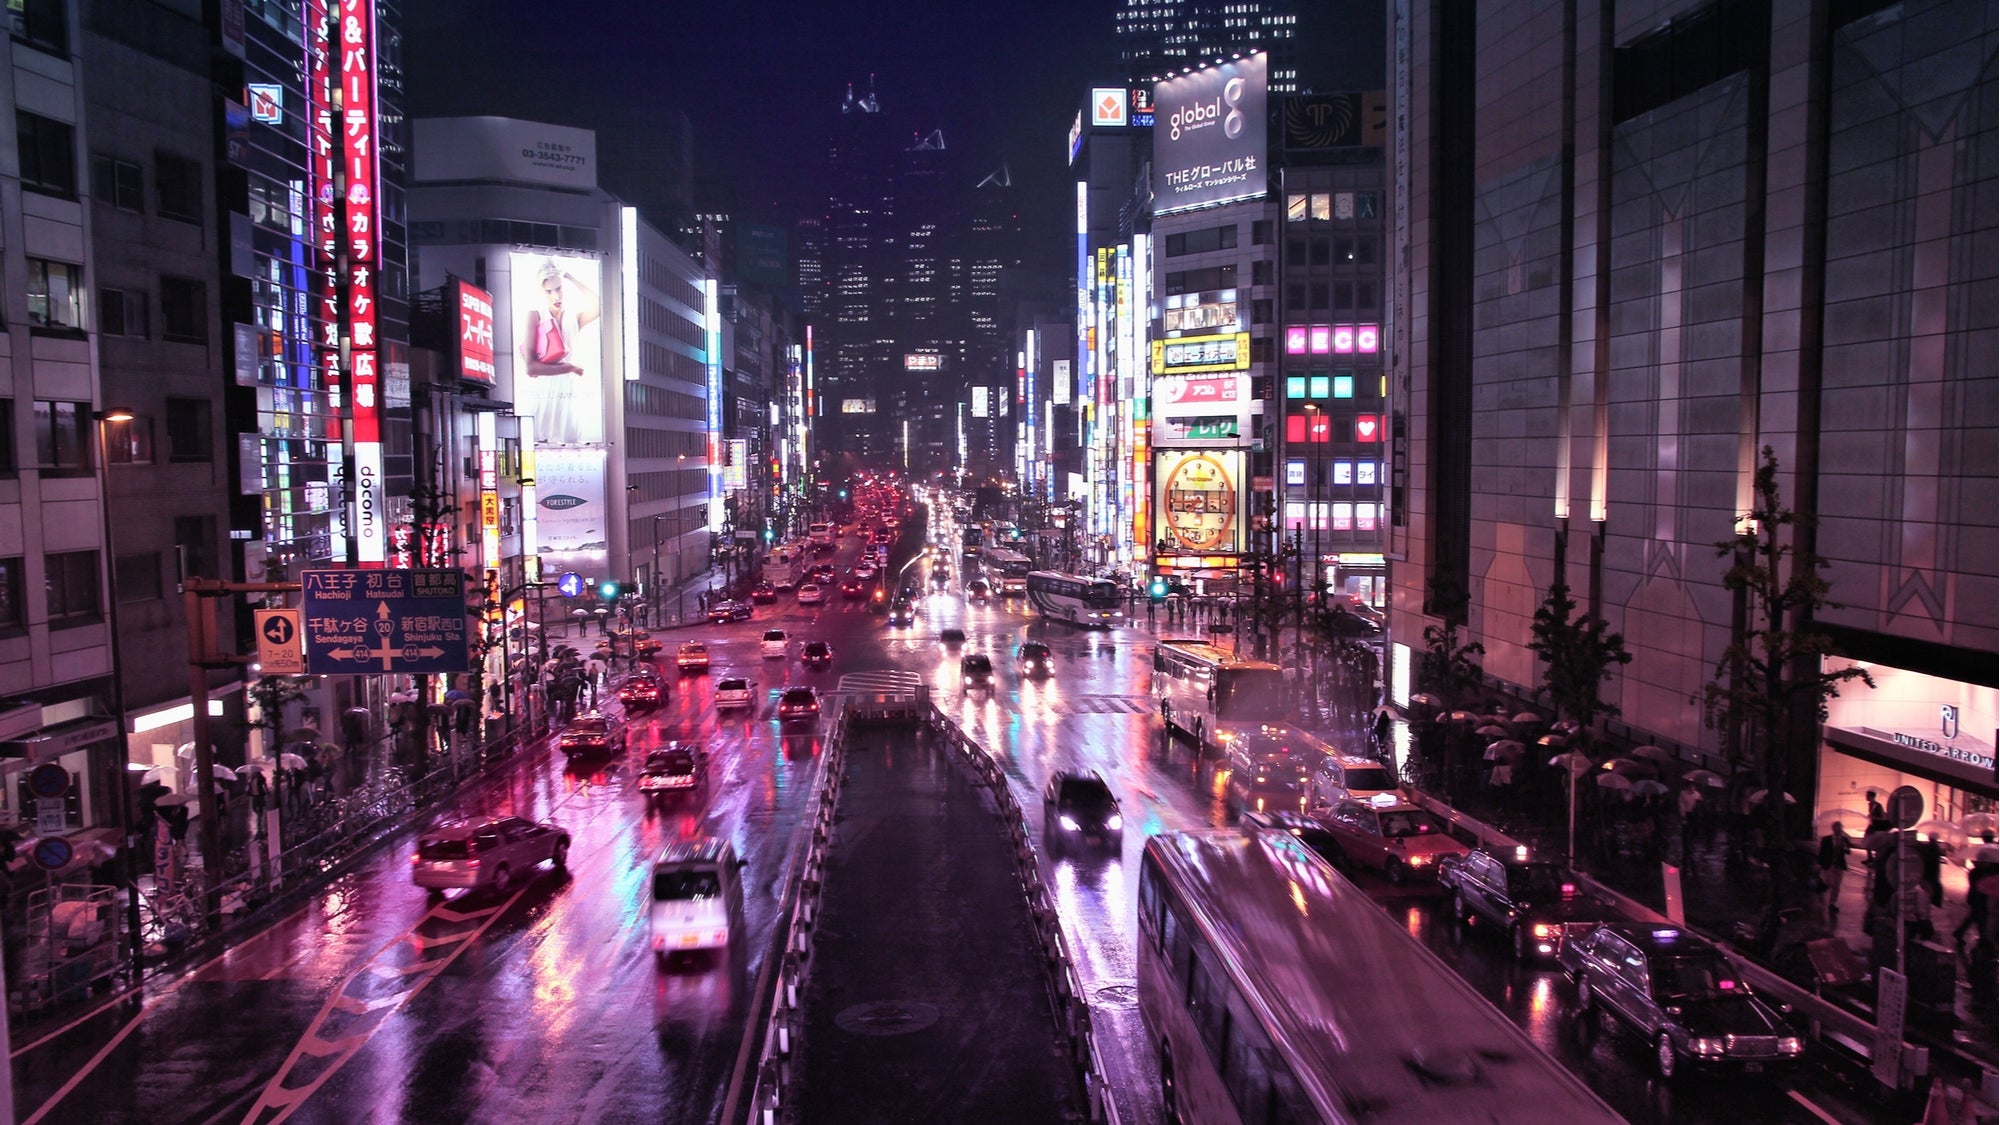 Go For Virtual Drives Through Cities Around The World